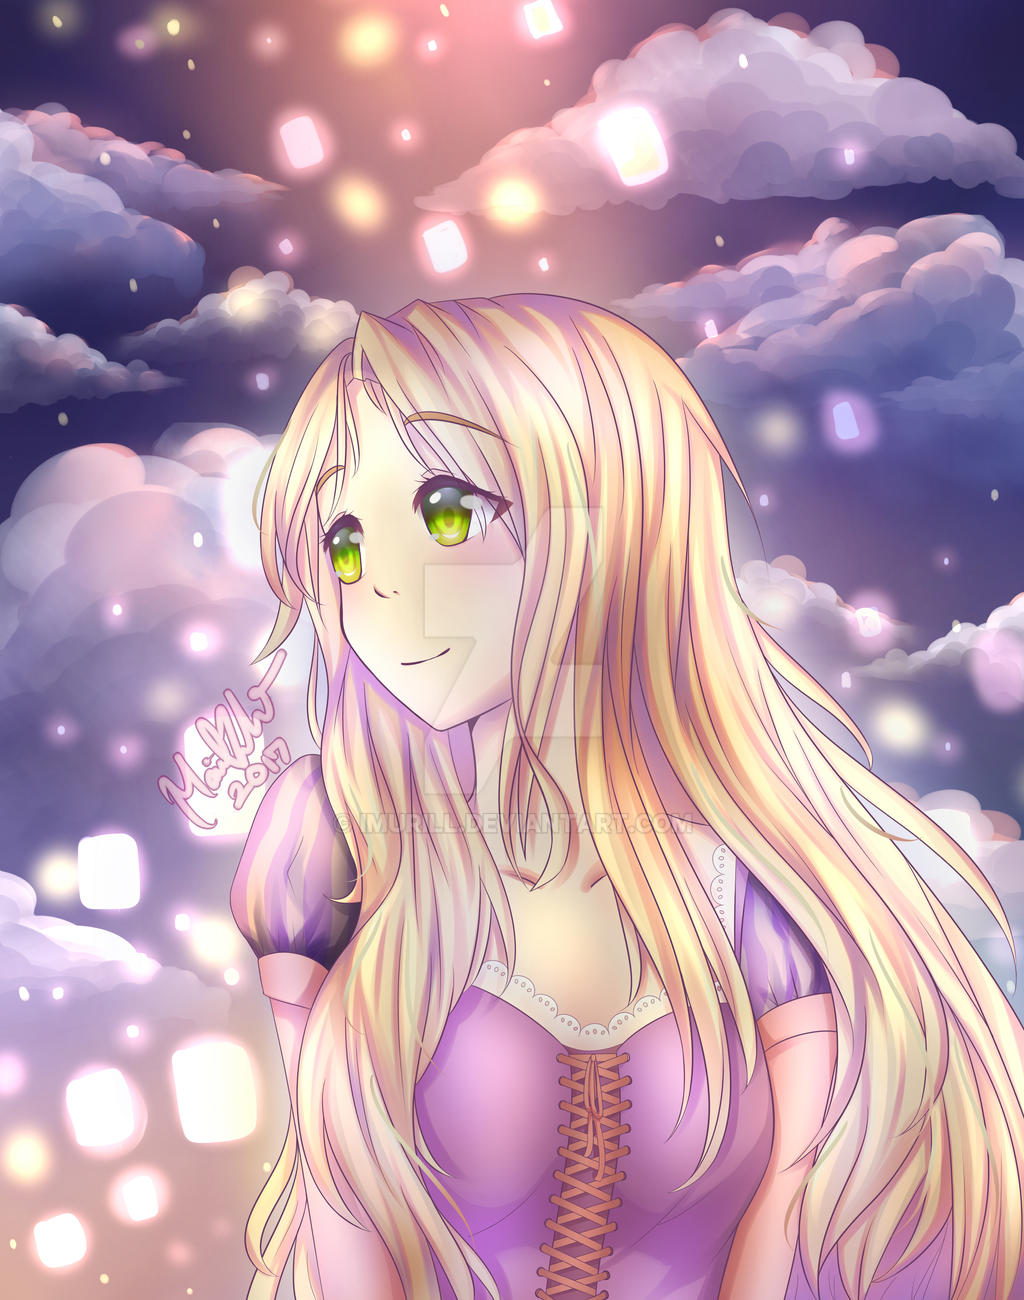 Rapunzel from Tangled by Nyra992 on DeviantArt